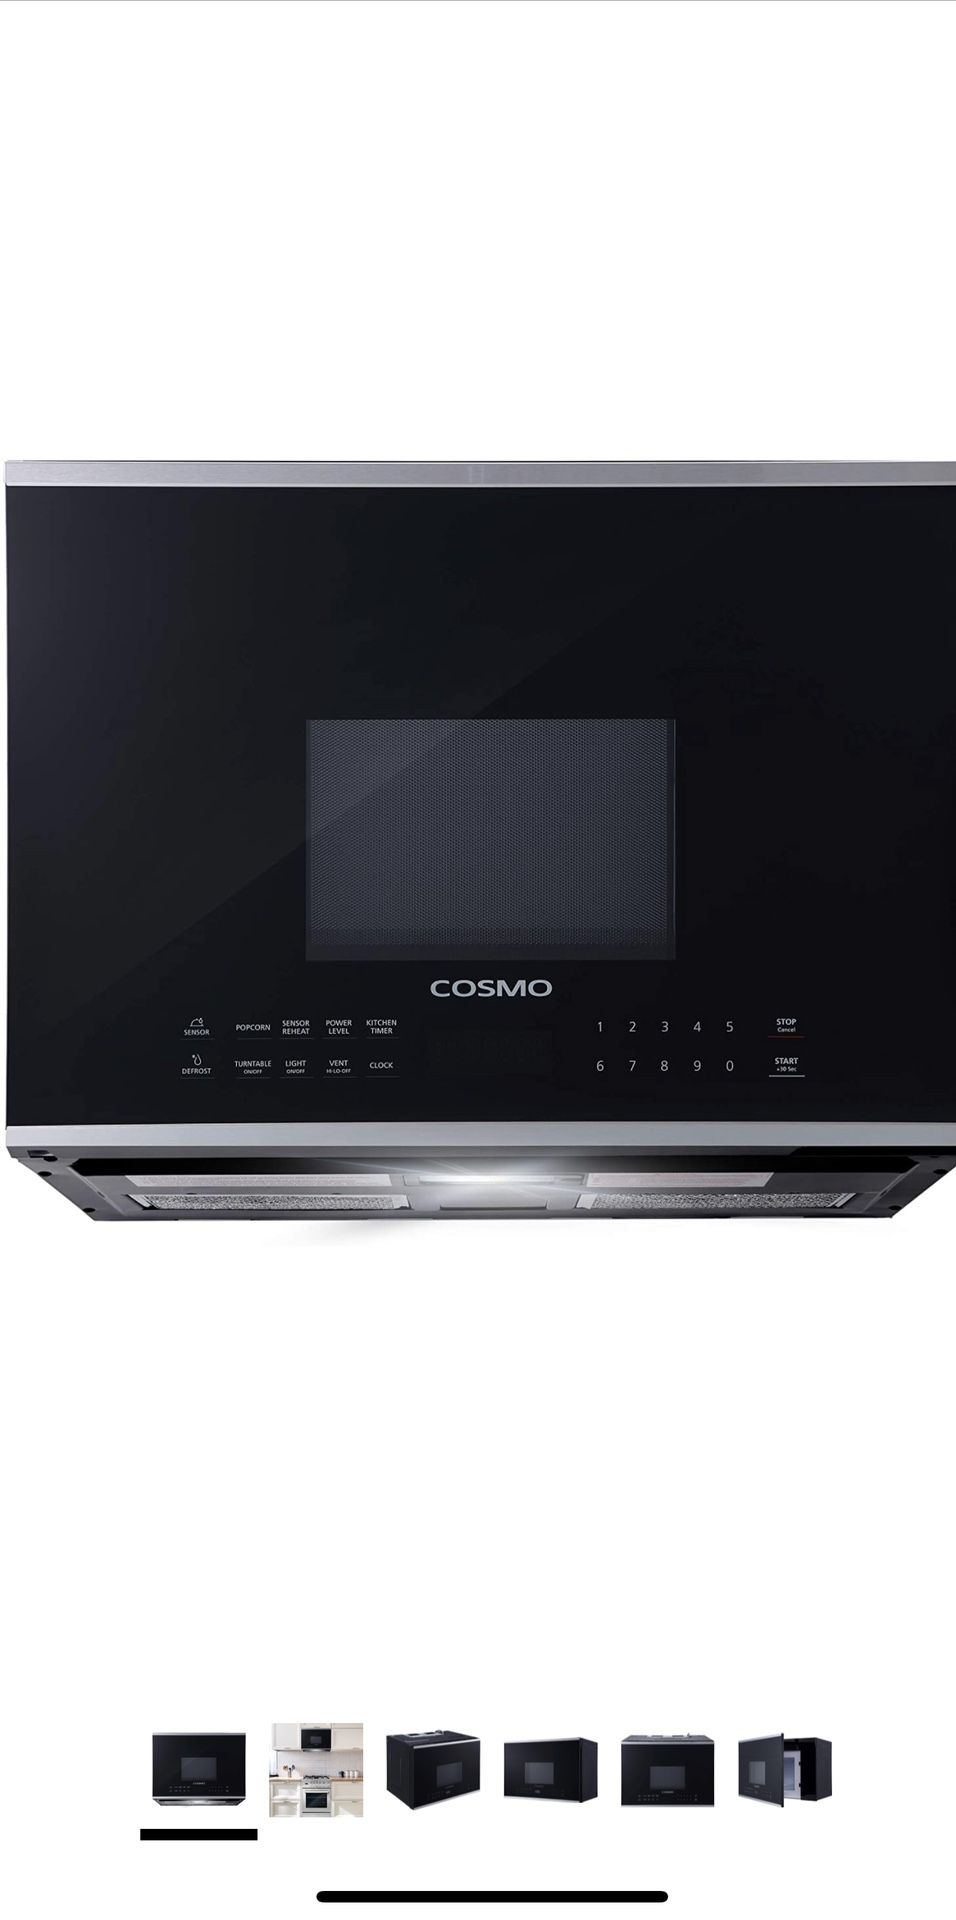 Cosmo COS-2413ORM1SS Over the Range Microwave Oven with Vent Fan, 1.34 cu. ft. Capacity, 1000W, 24 inch, Black/Stainless Steel